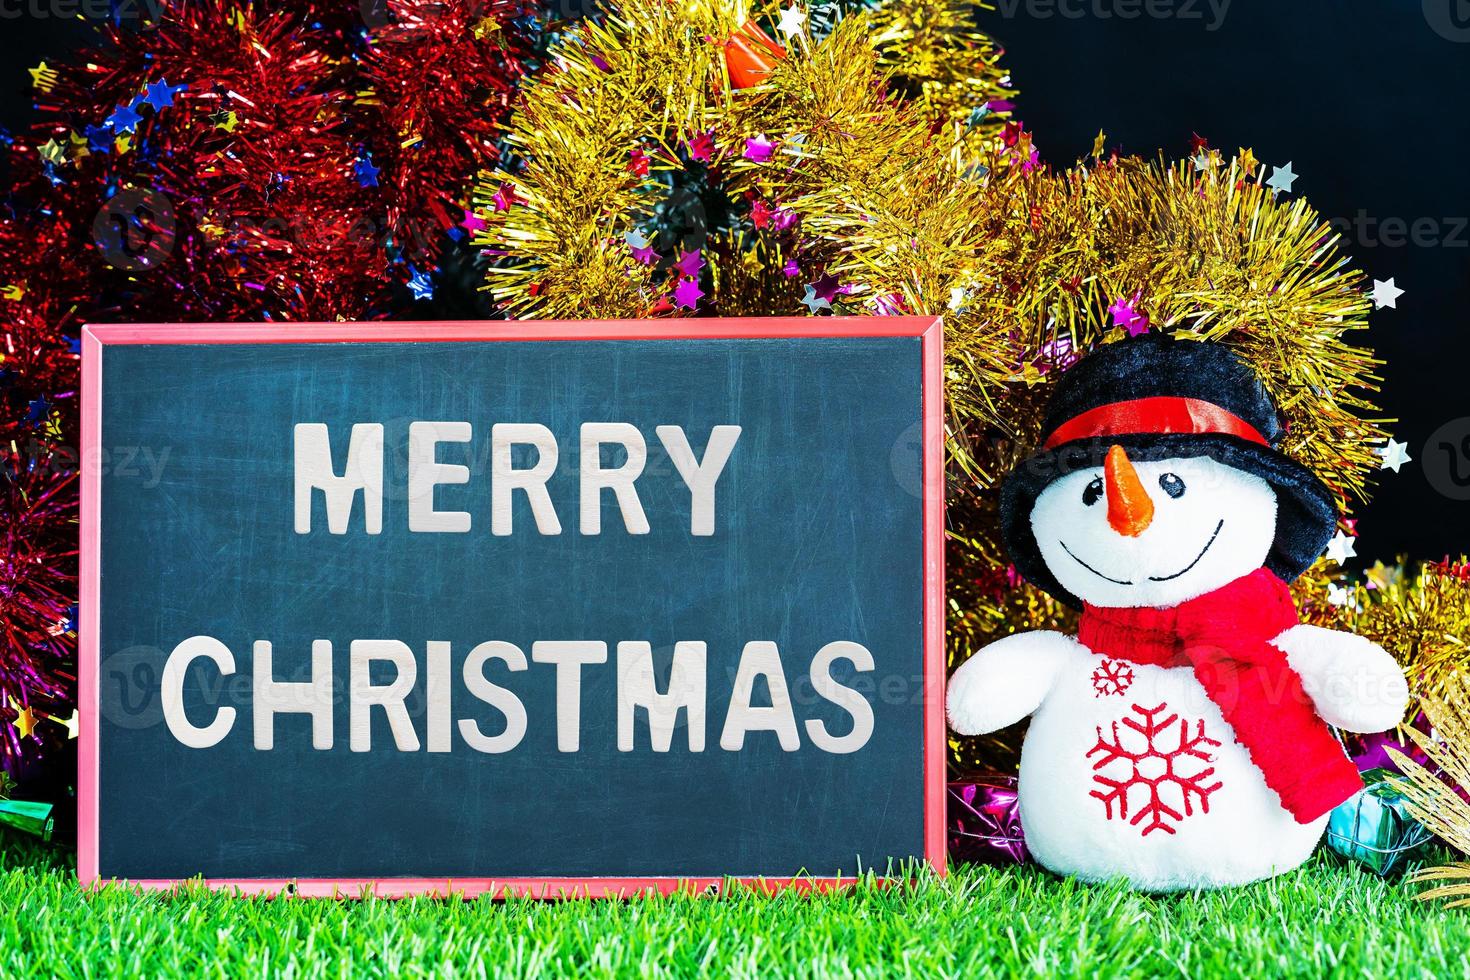 Doll snowman on green grass with chalkboard photo